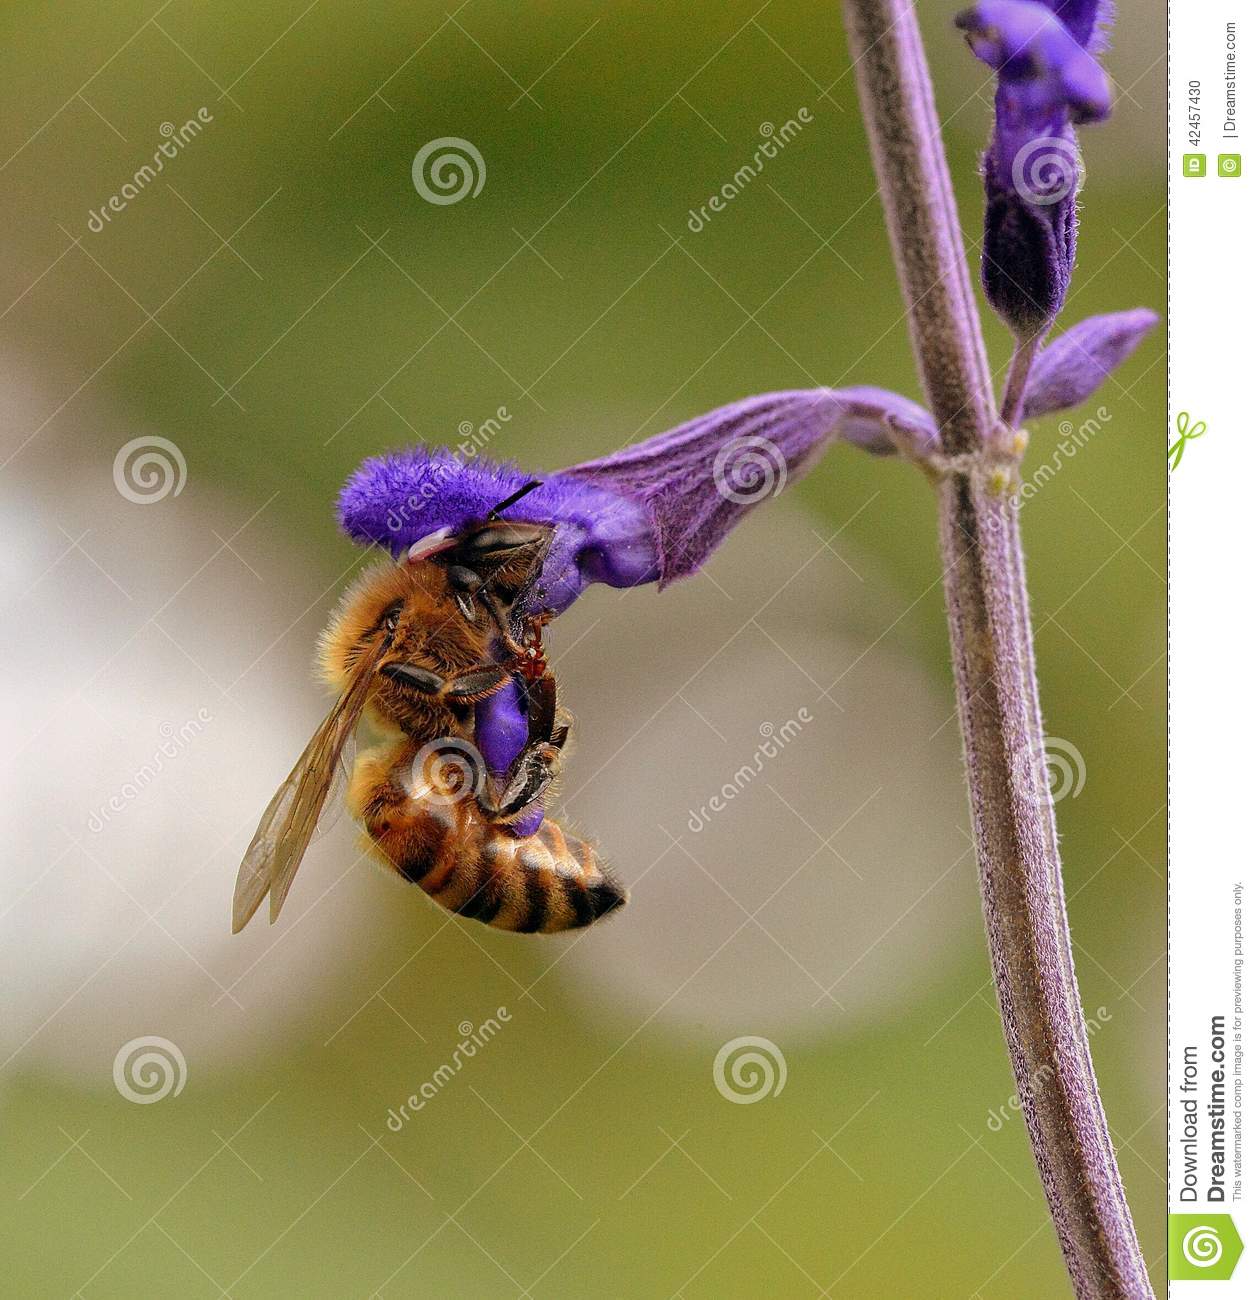 Bee On Flower Background Beautiful Beeswax Flower Biology Of Bees Bee